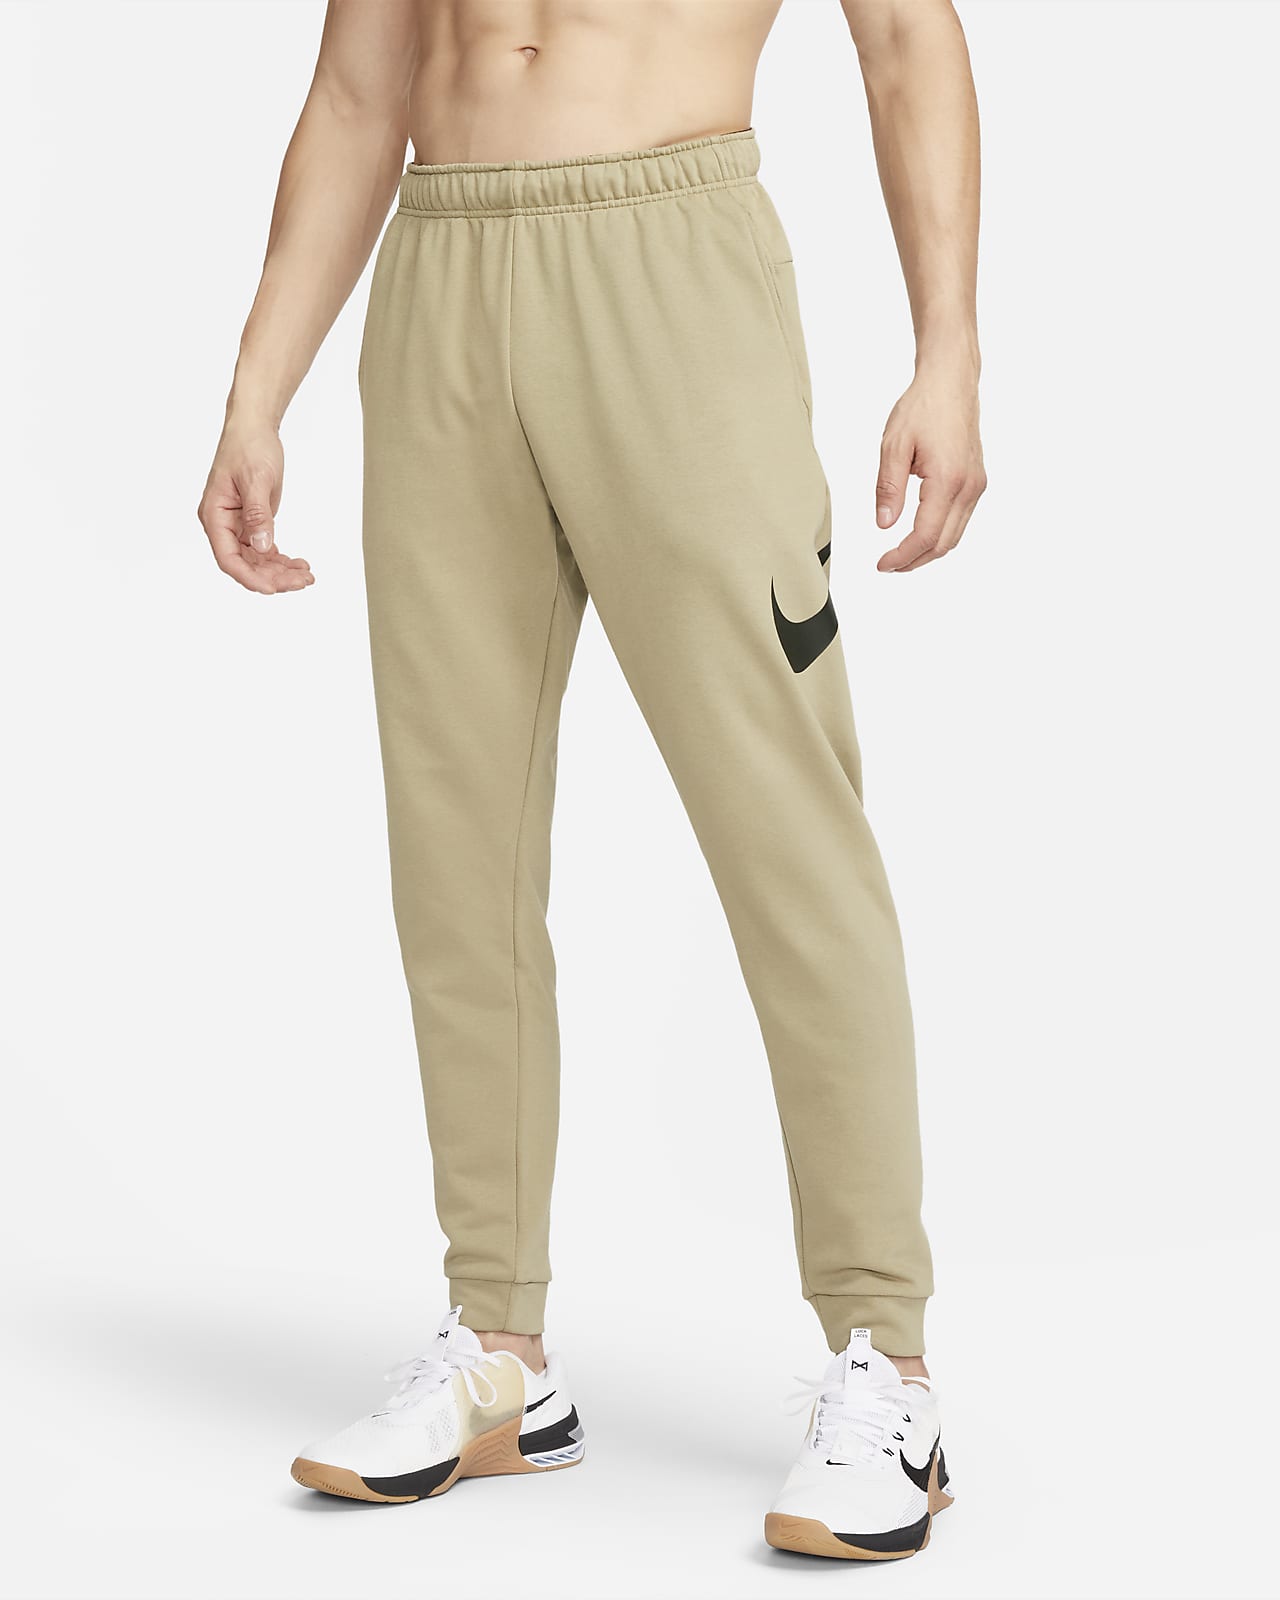 Nike Dry Graphic Men's Dri-FIT Taper Fitness Trousers. Nike IE